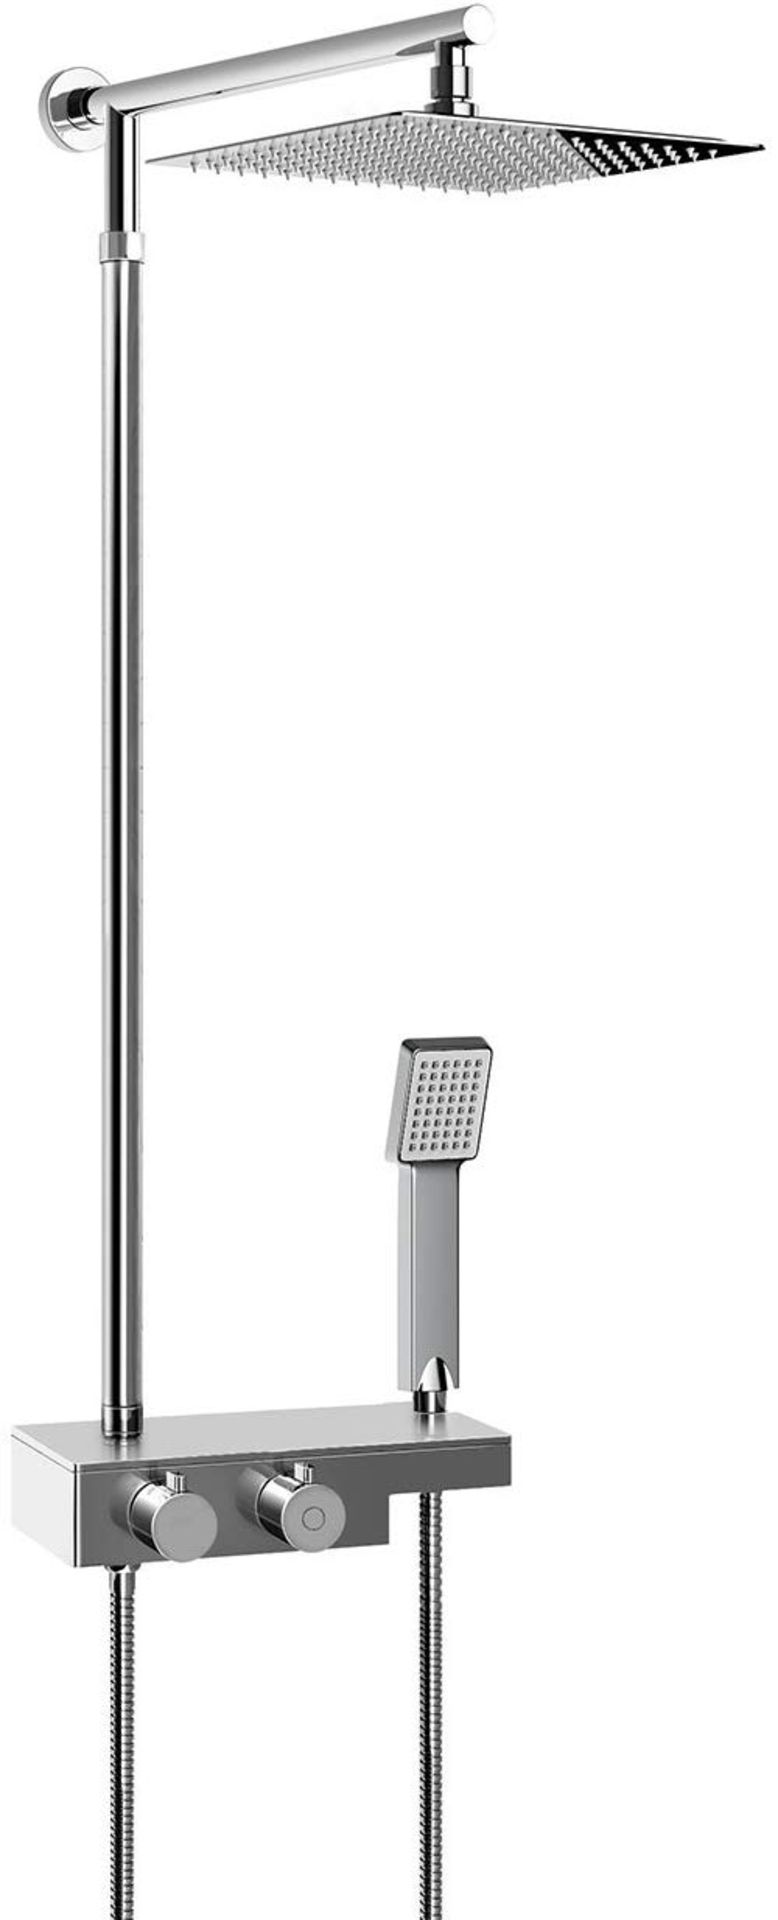 (TT199) Square Thermostatic Bar Mixer Shower Set Valve with Shelf 10" Head + Handset. RRP £349... - Image 3 of 3